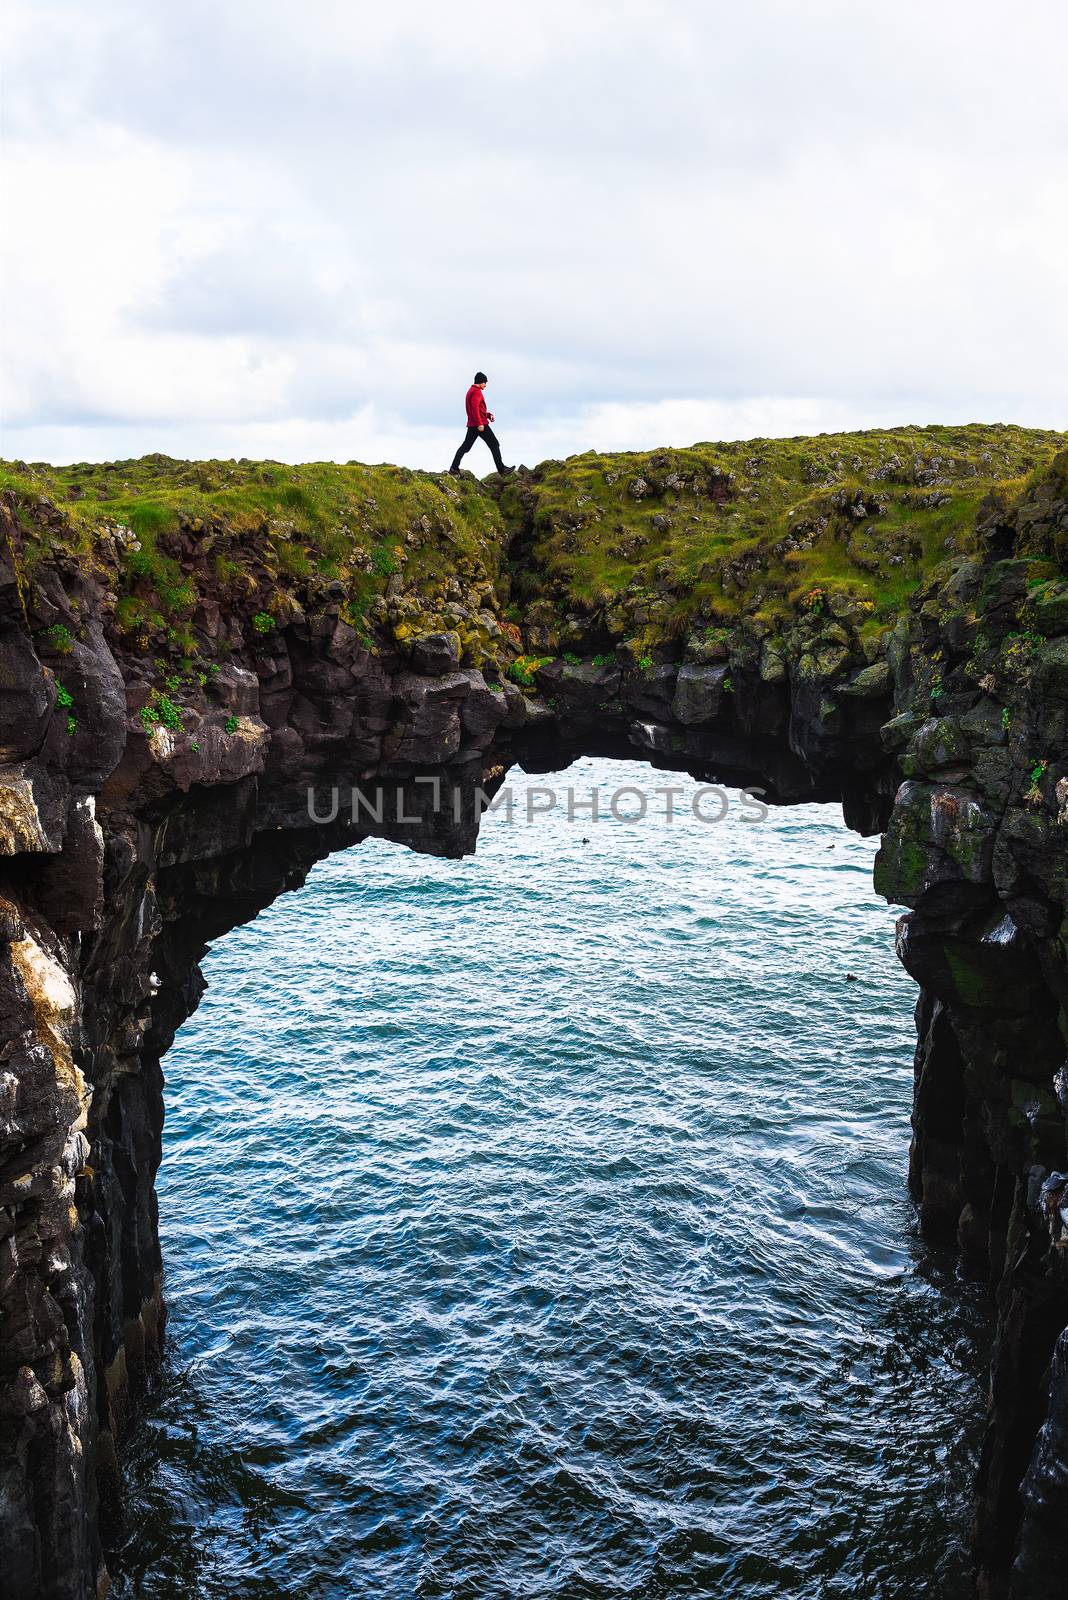 Tourist walks over a natural rock bridge connecting basalt cliffs in Arnarstapi, Iceland, with Atlantic Ocean in the background.